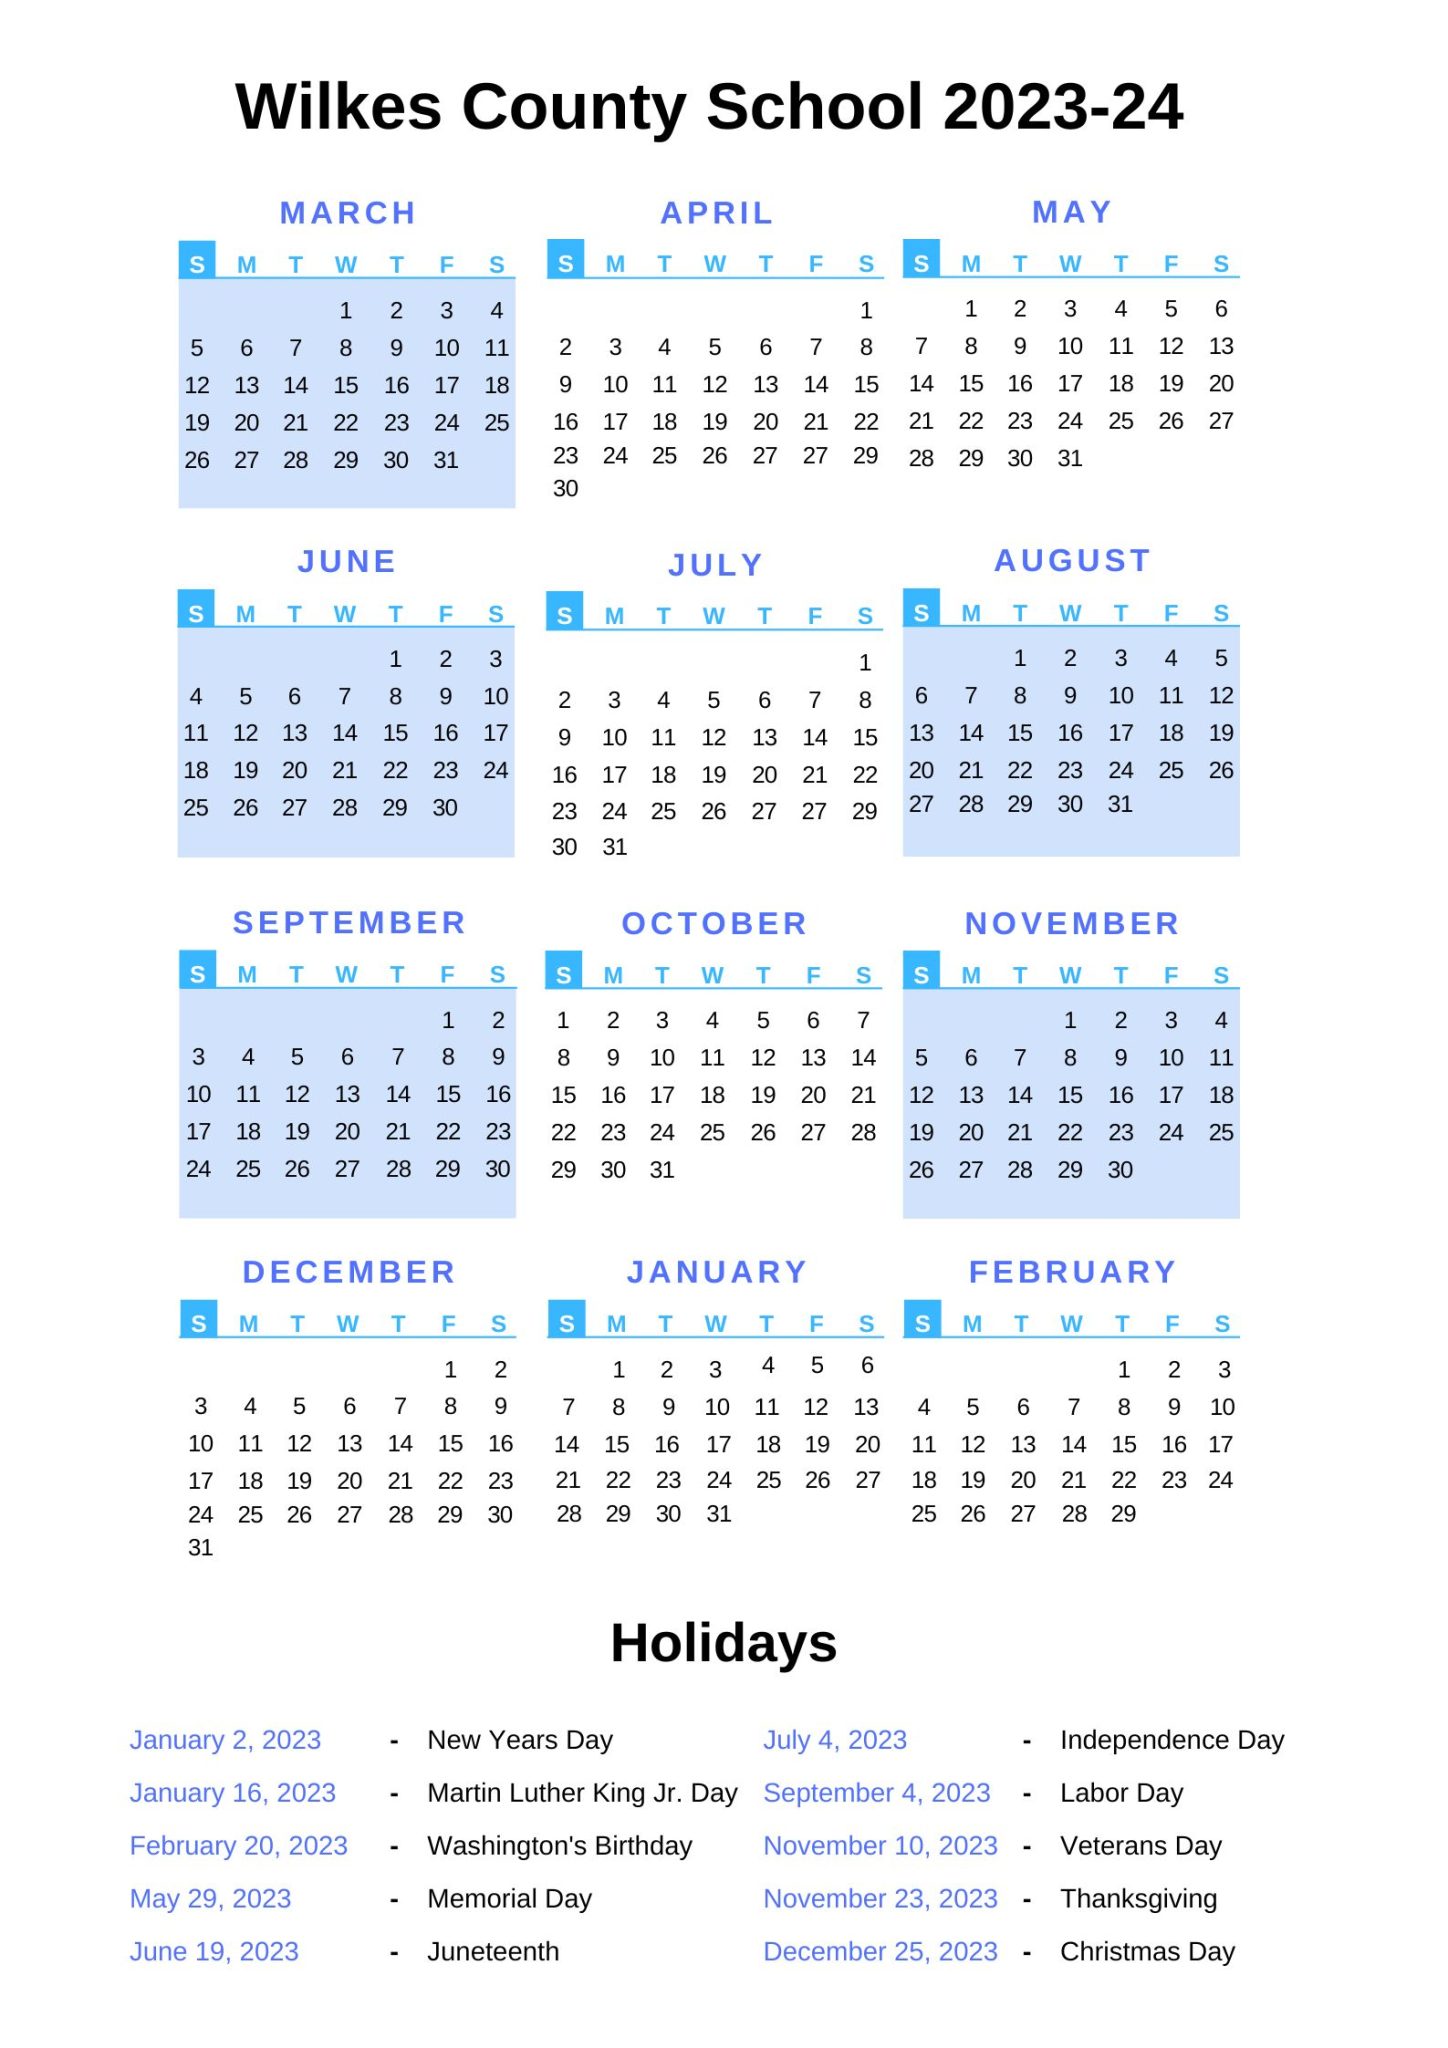 Wilkes County Schools Calendar 202324 With Holidays